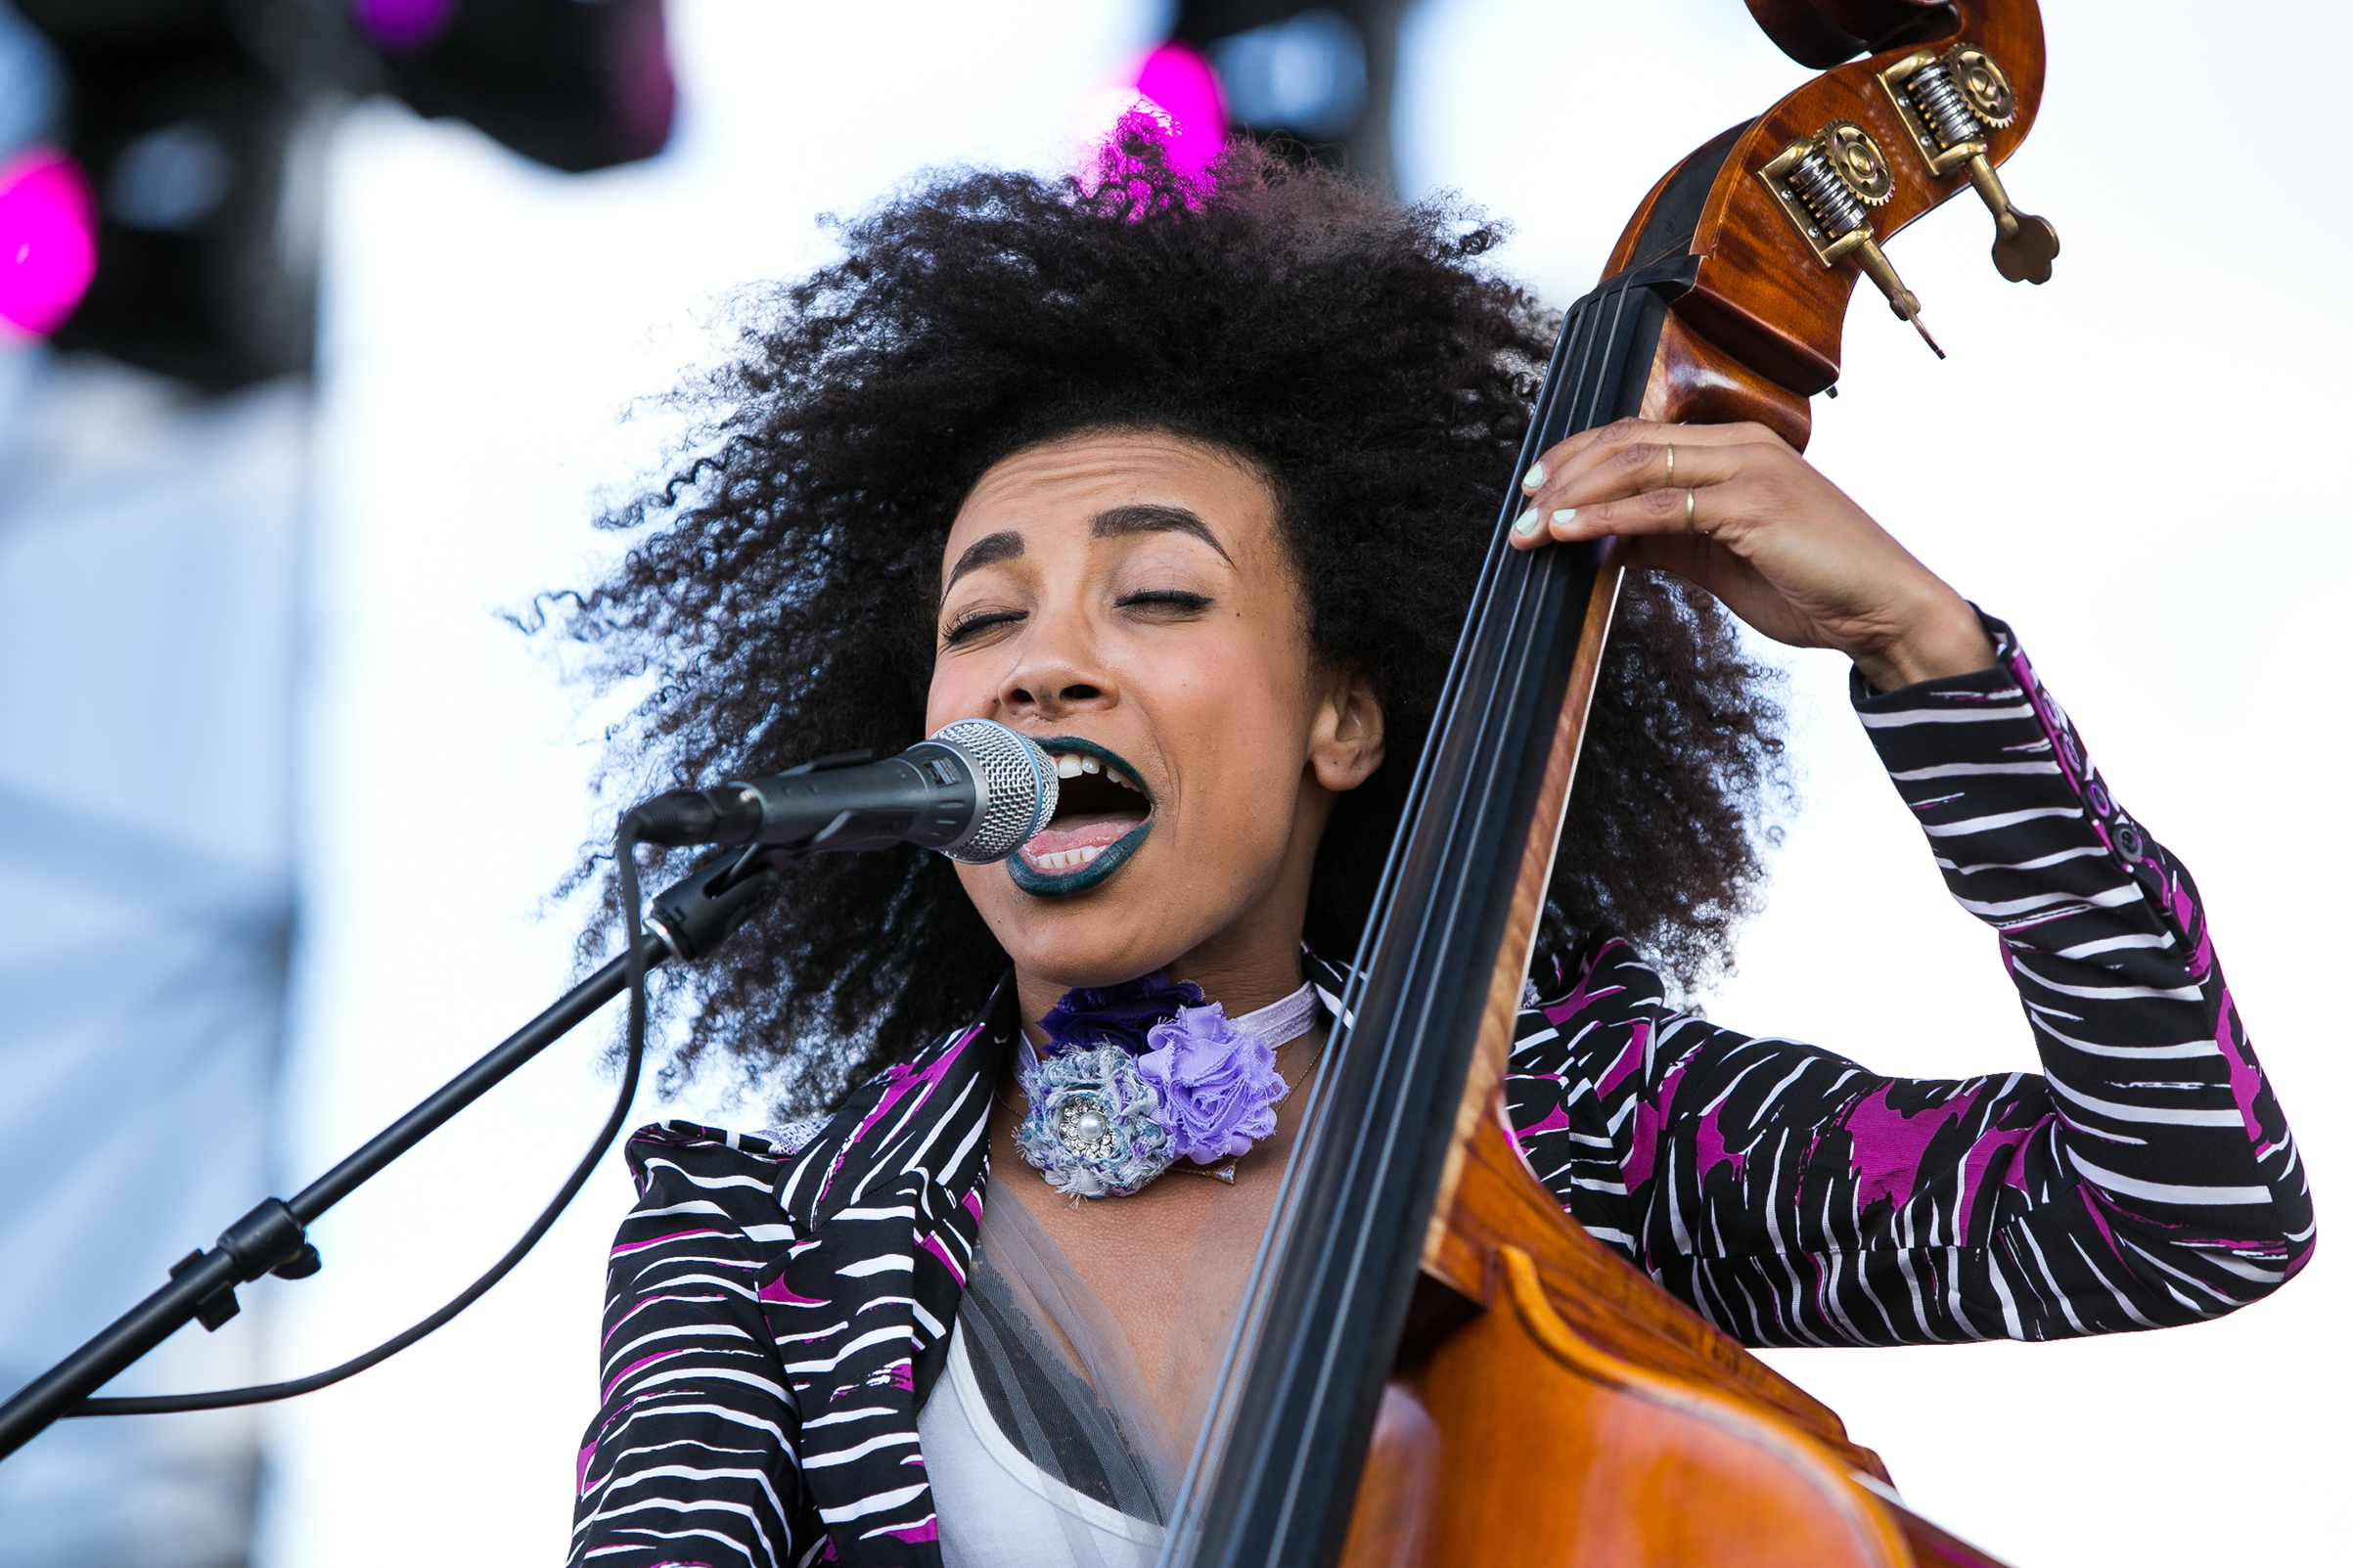 Esperanza Spalding performs during the 2017 Jazz in The Gardens at the Hard Rock Stadium in Miami Gardens, March 19, 2017. (Aaron Gilbert—MediaPunch/IPX/AP)